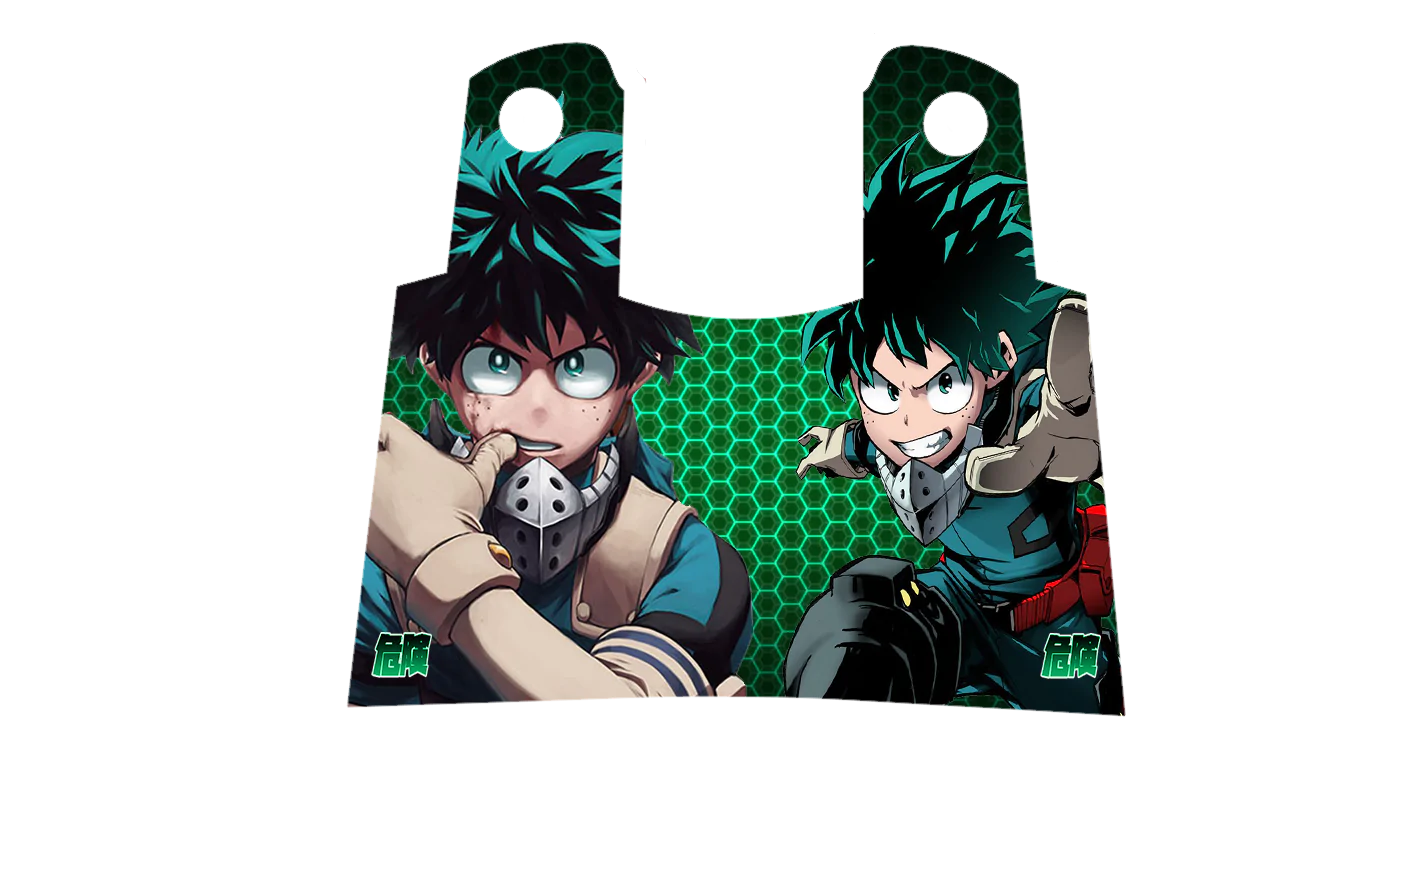 This MHA - Deku grip wrap is perfect for putting on your favorite blaster. Just clean the surface it's going on, peel off the protective backing, and firmly place it down onto the grip. This wrap goes perfectly with our Magazine wraps! 